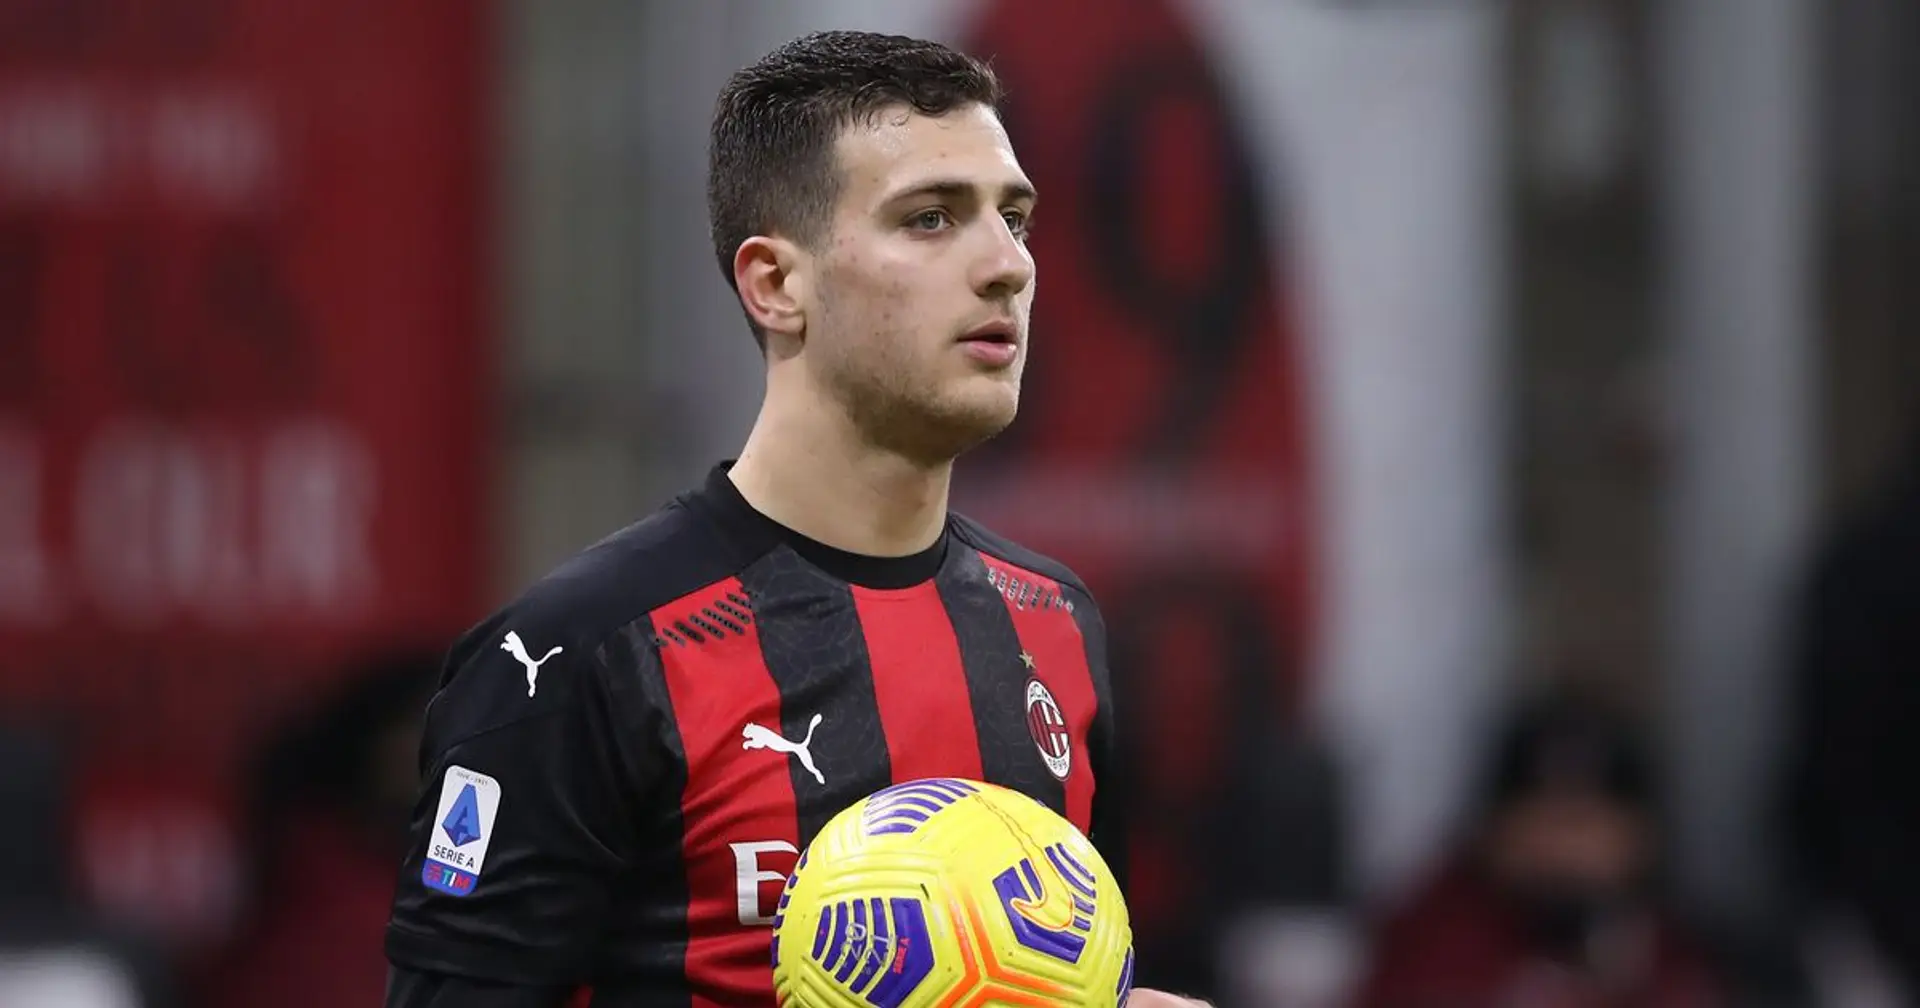 'He could work well for any team using 3 CBs': AC Milan fans share their thoughts on Diogo Dalot